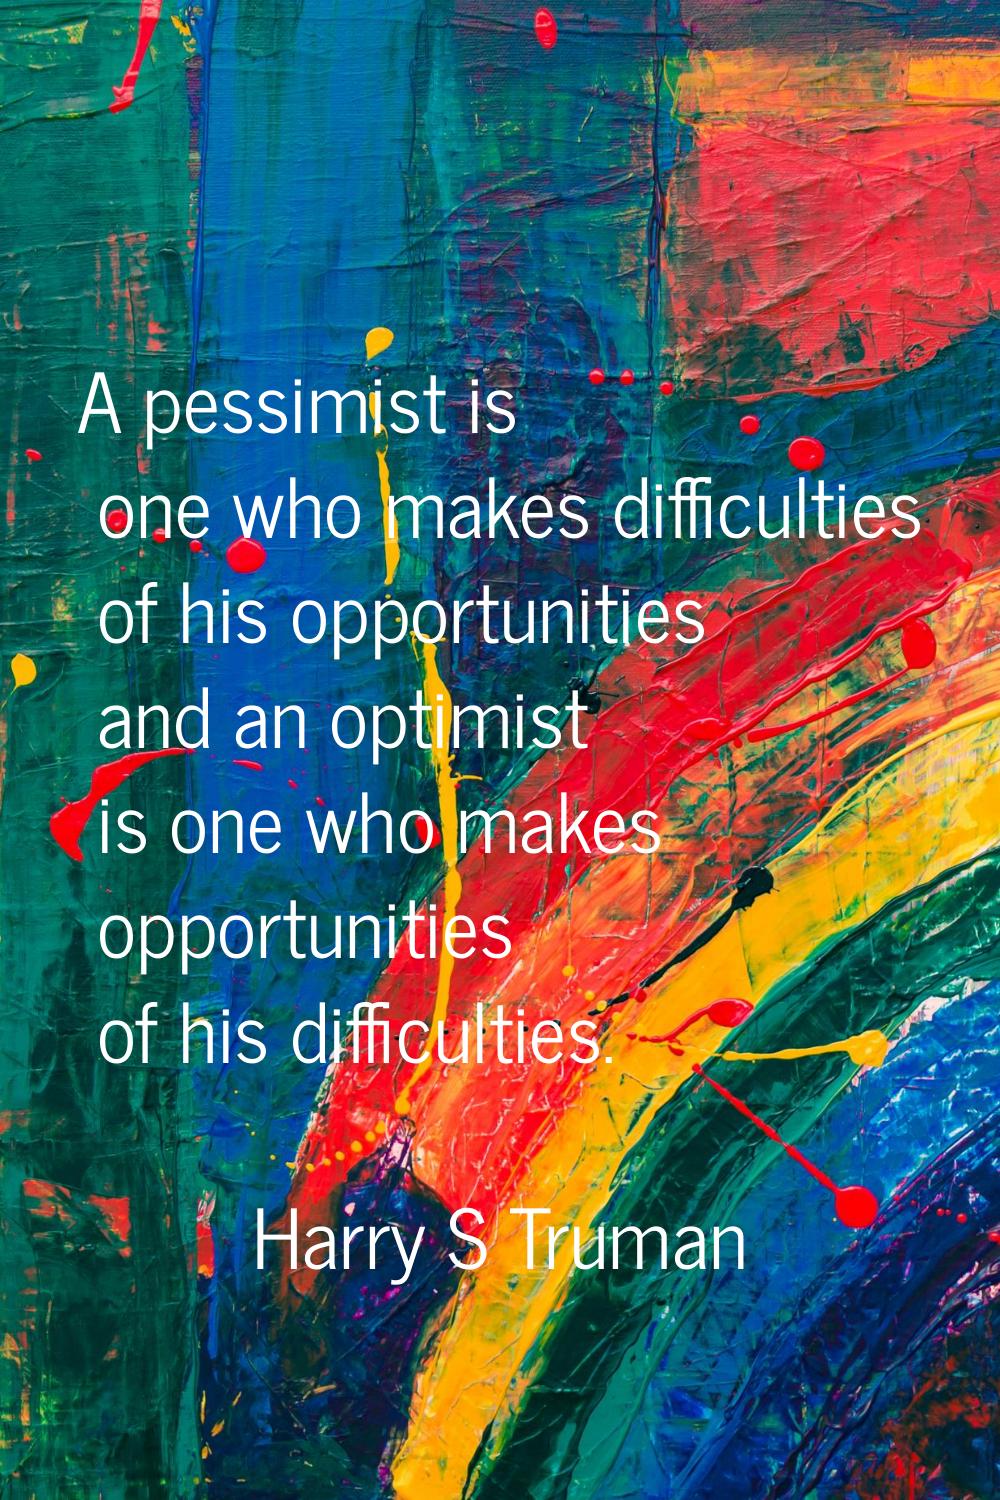 A pessimist is one who makes difficulties of his opportunities and an optimist is one who makes opp